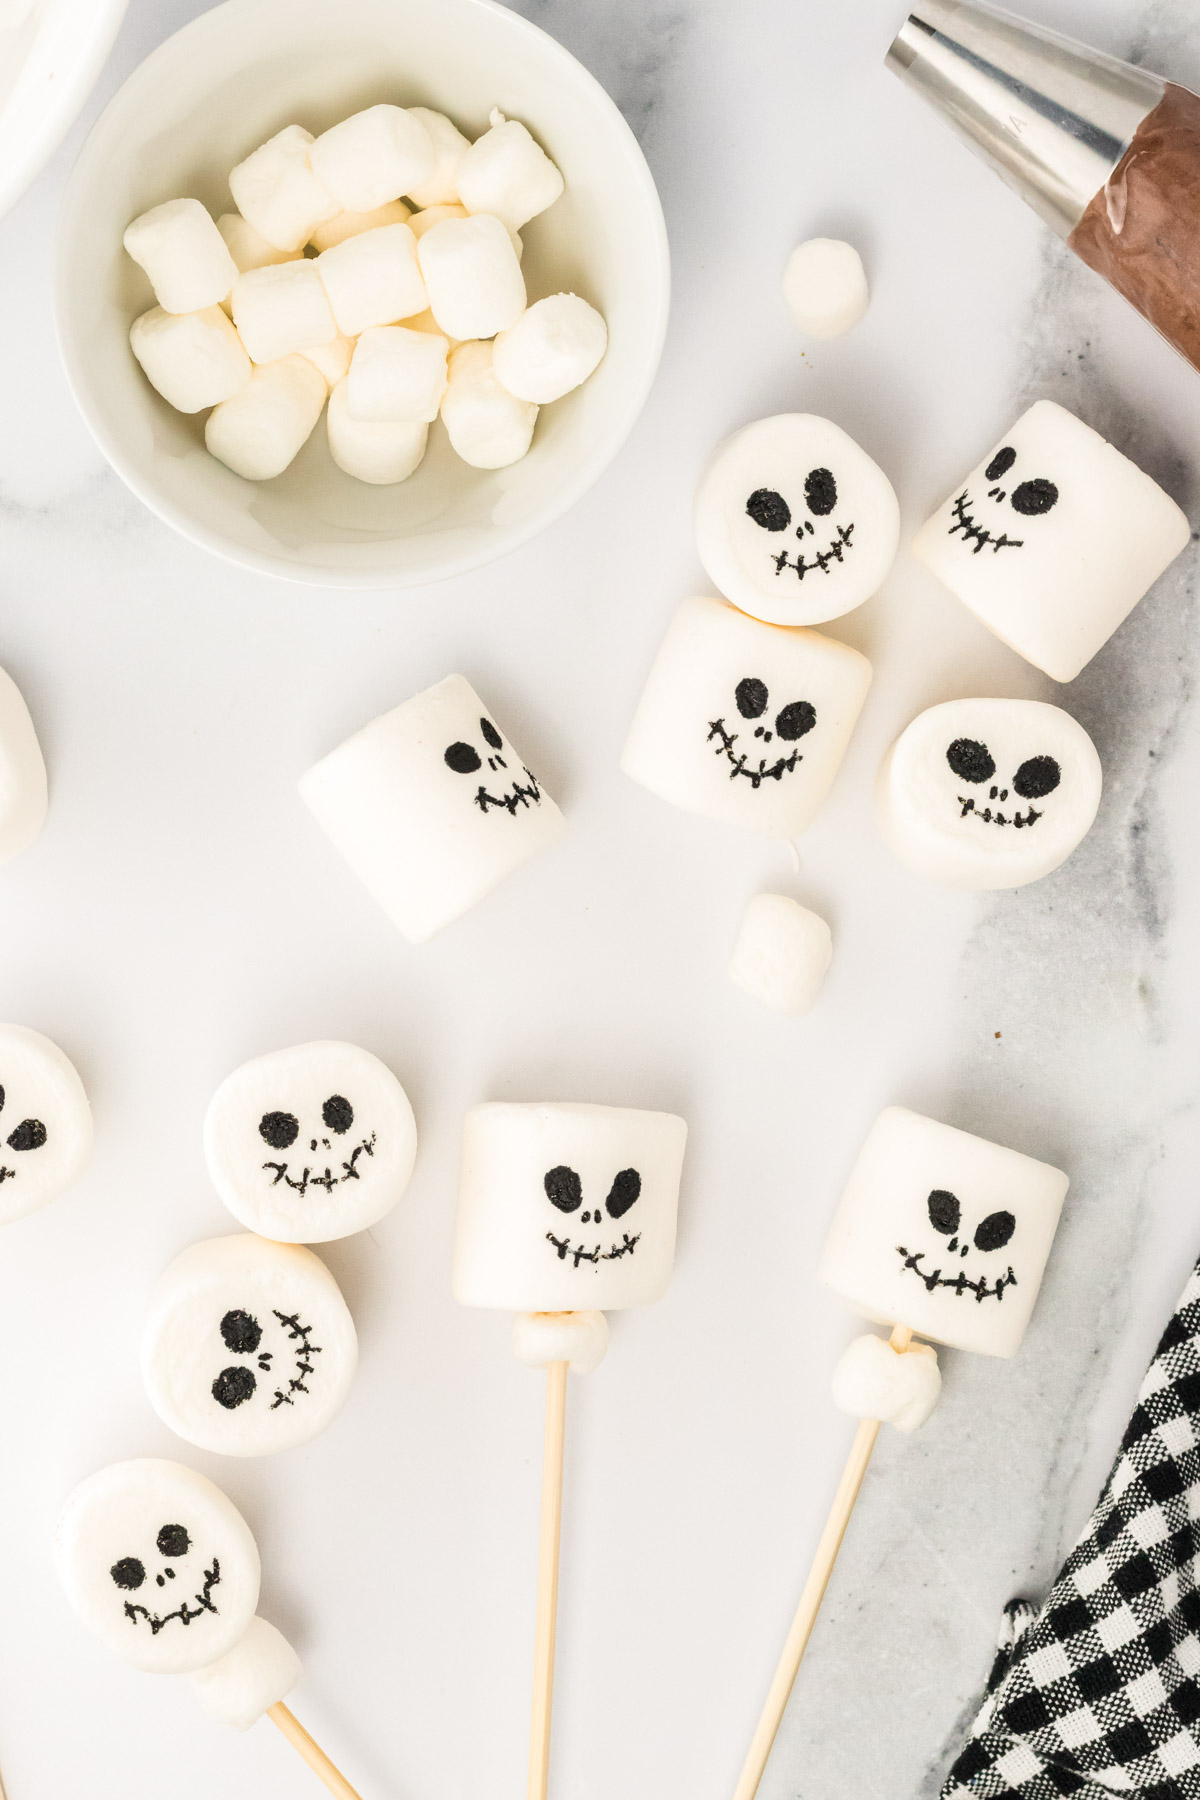 Faces being drawn on marshmallows with edible marker.